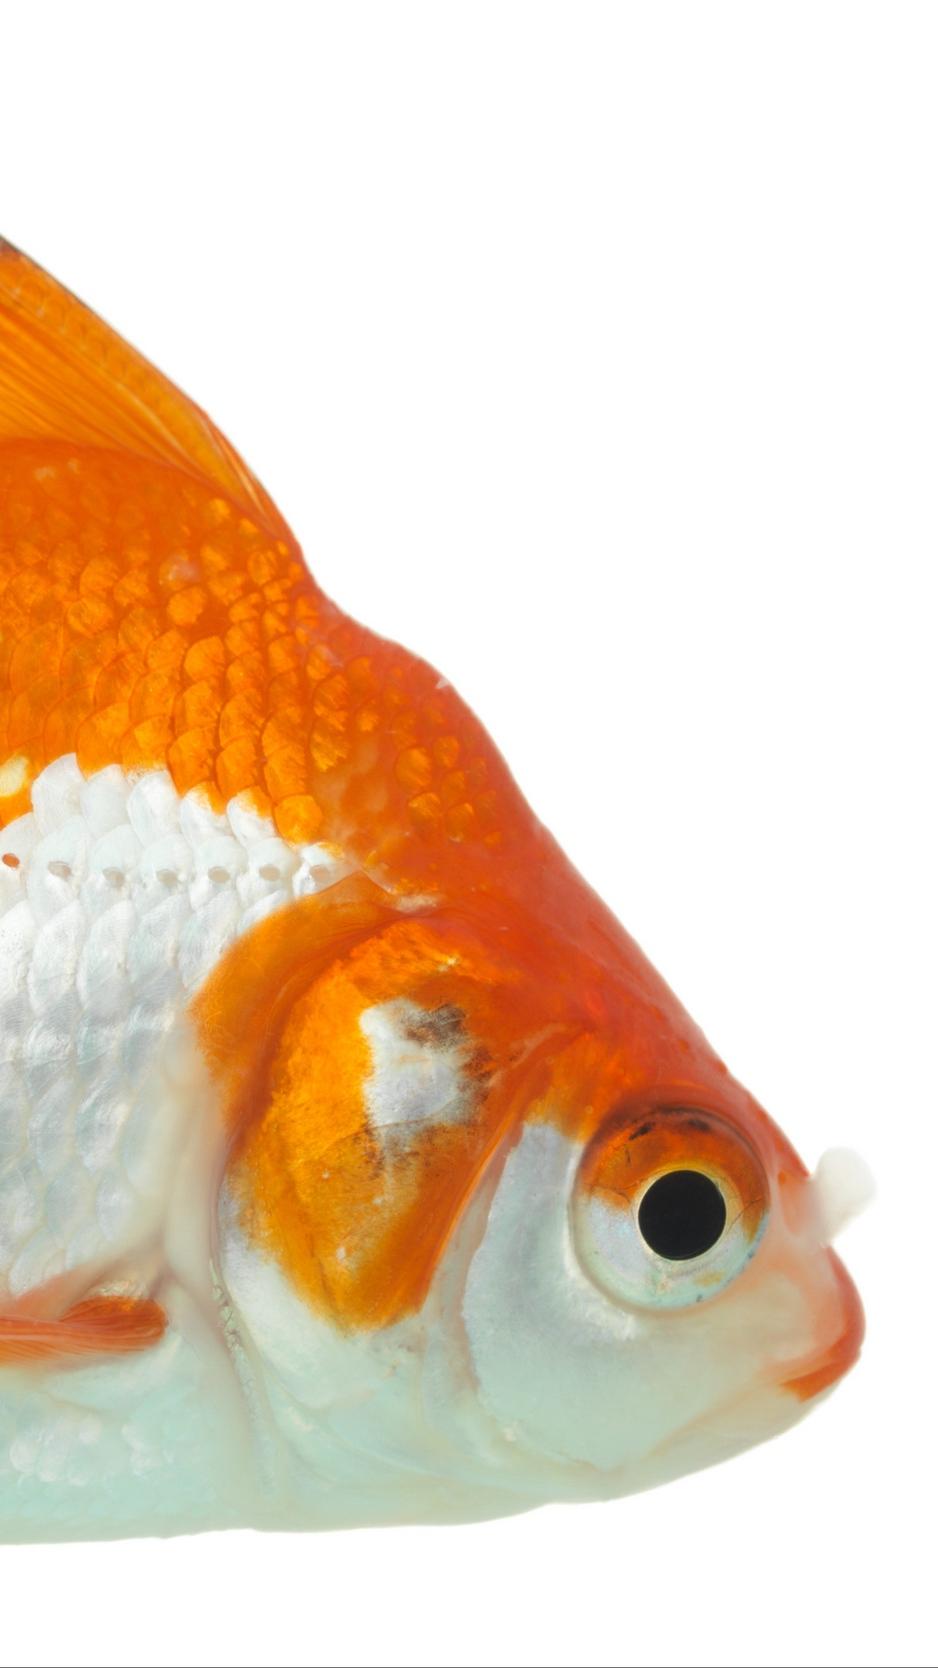 Download wallpapers 938x1668 goldfish, white backgrounds